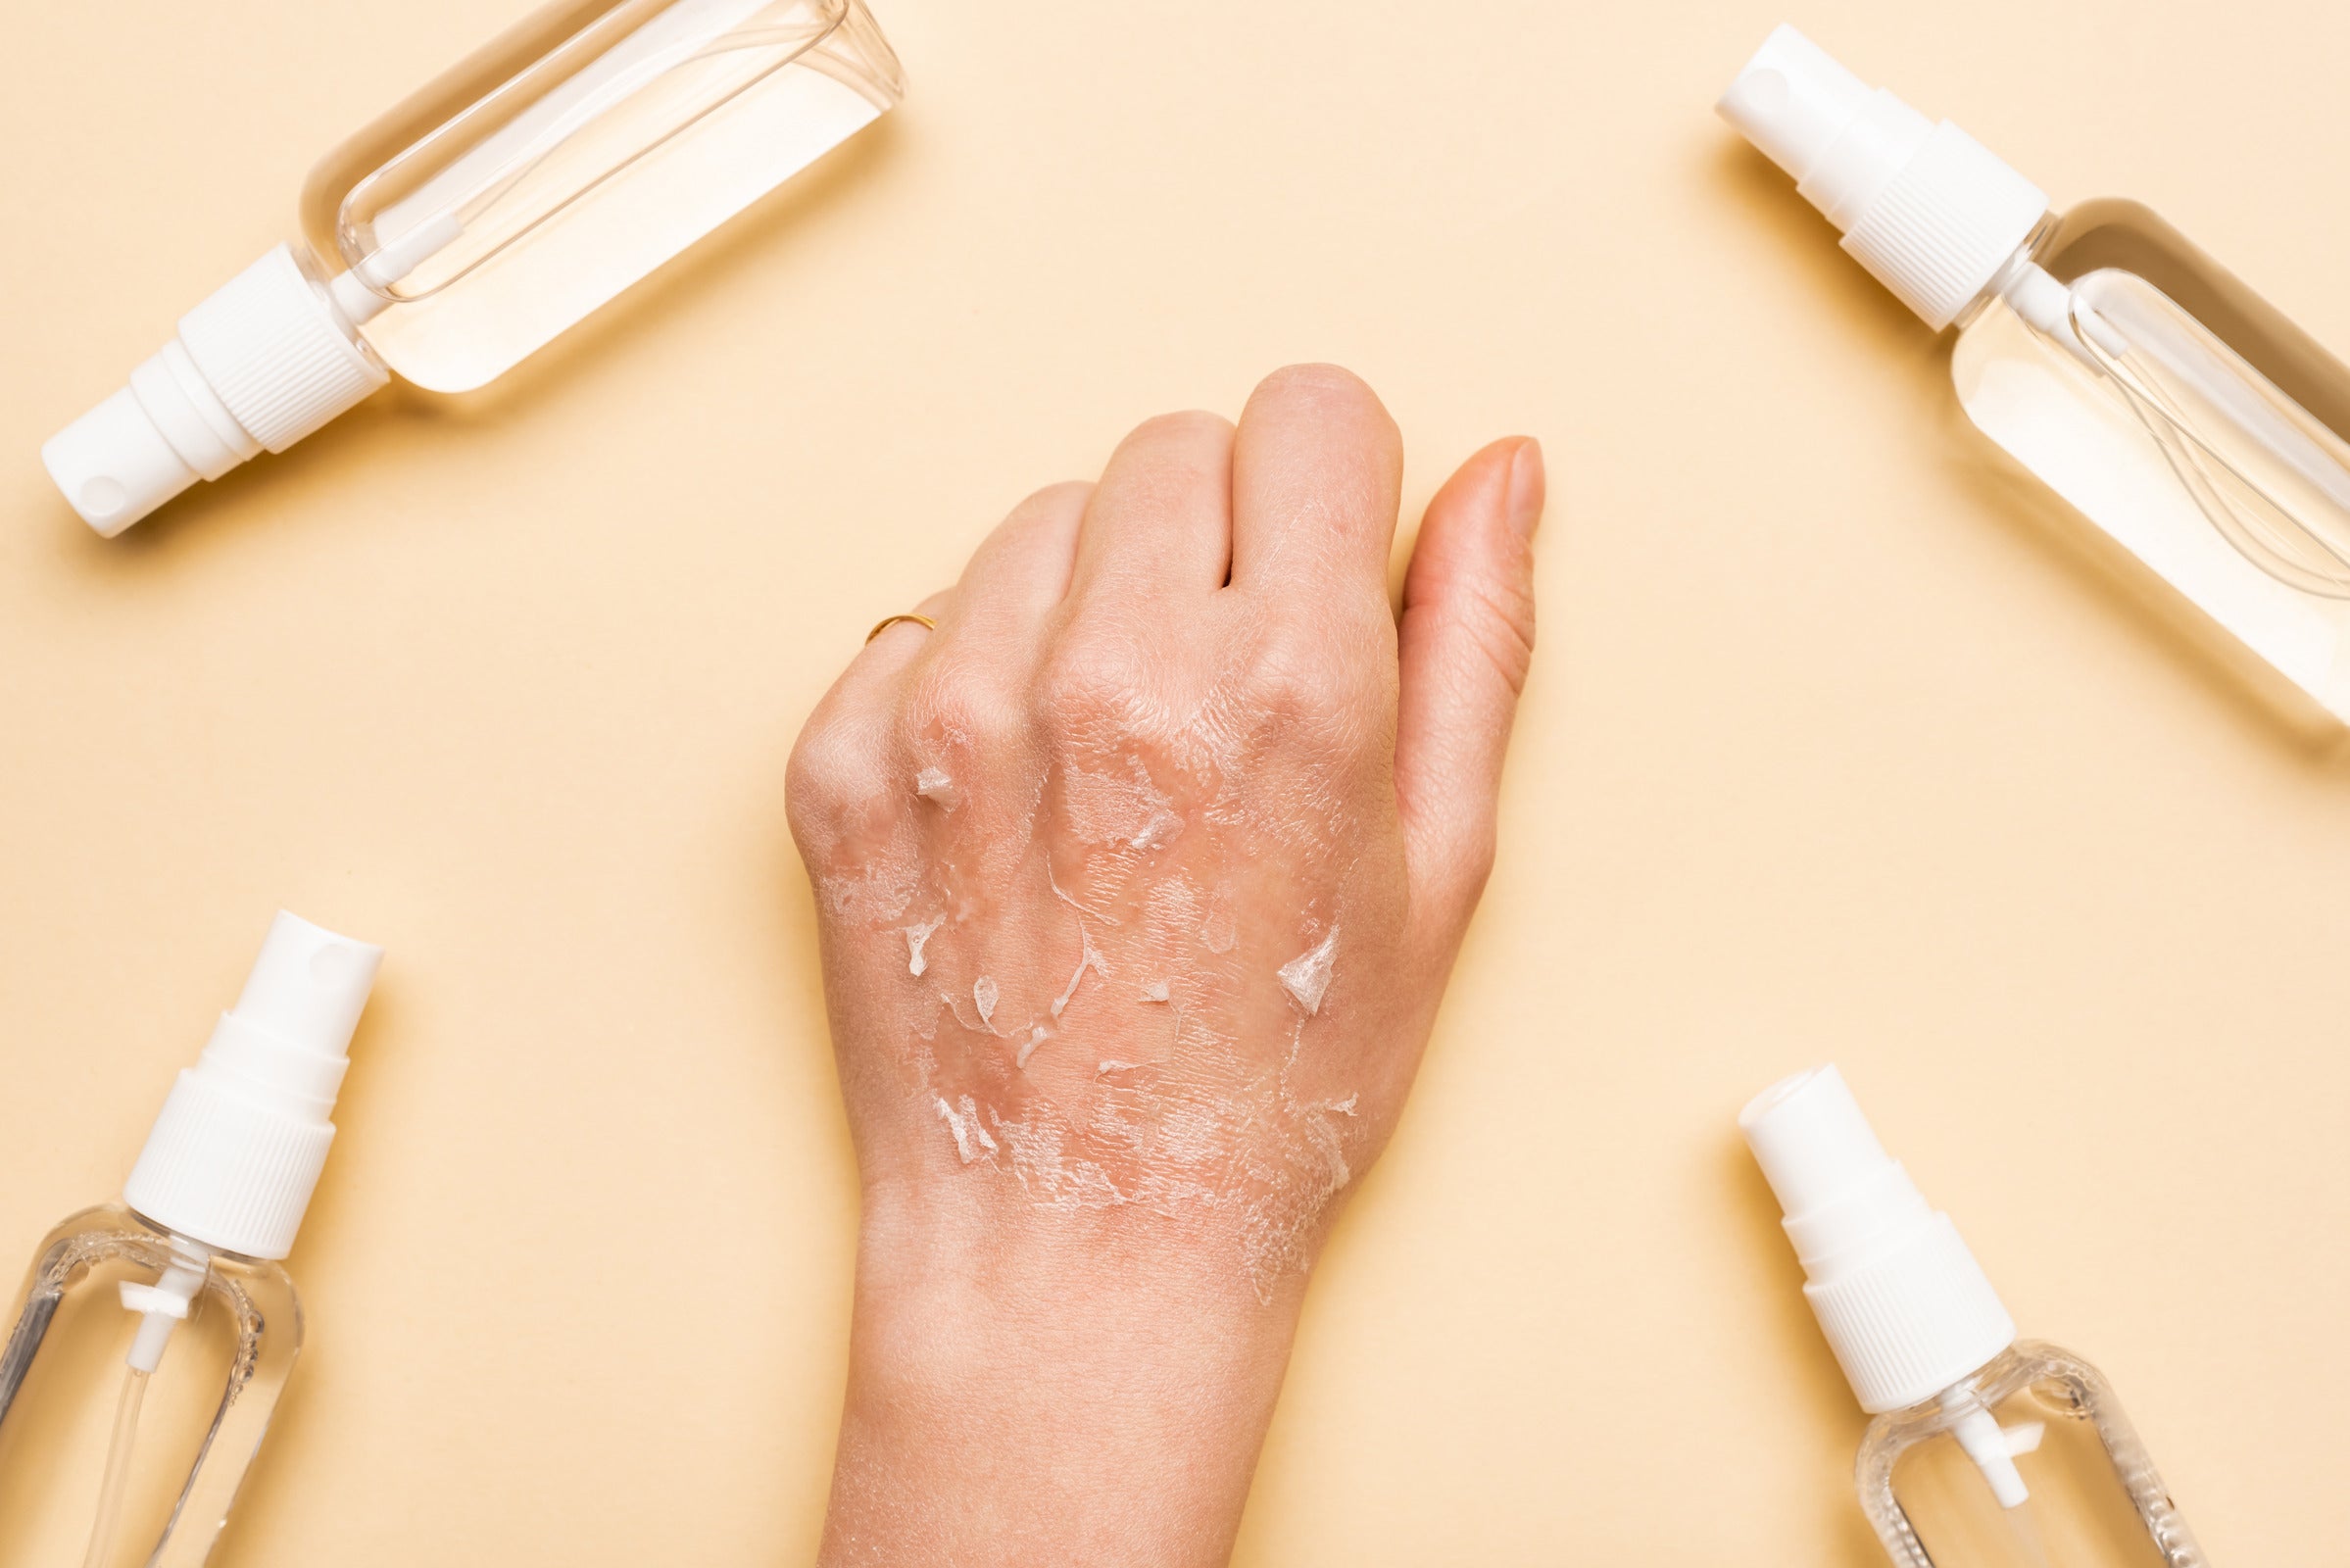 5 Tips and Mistakes on Disinfecting Wounds with Hand Sanitizer